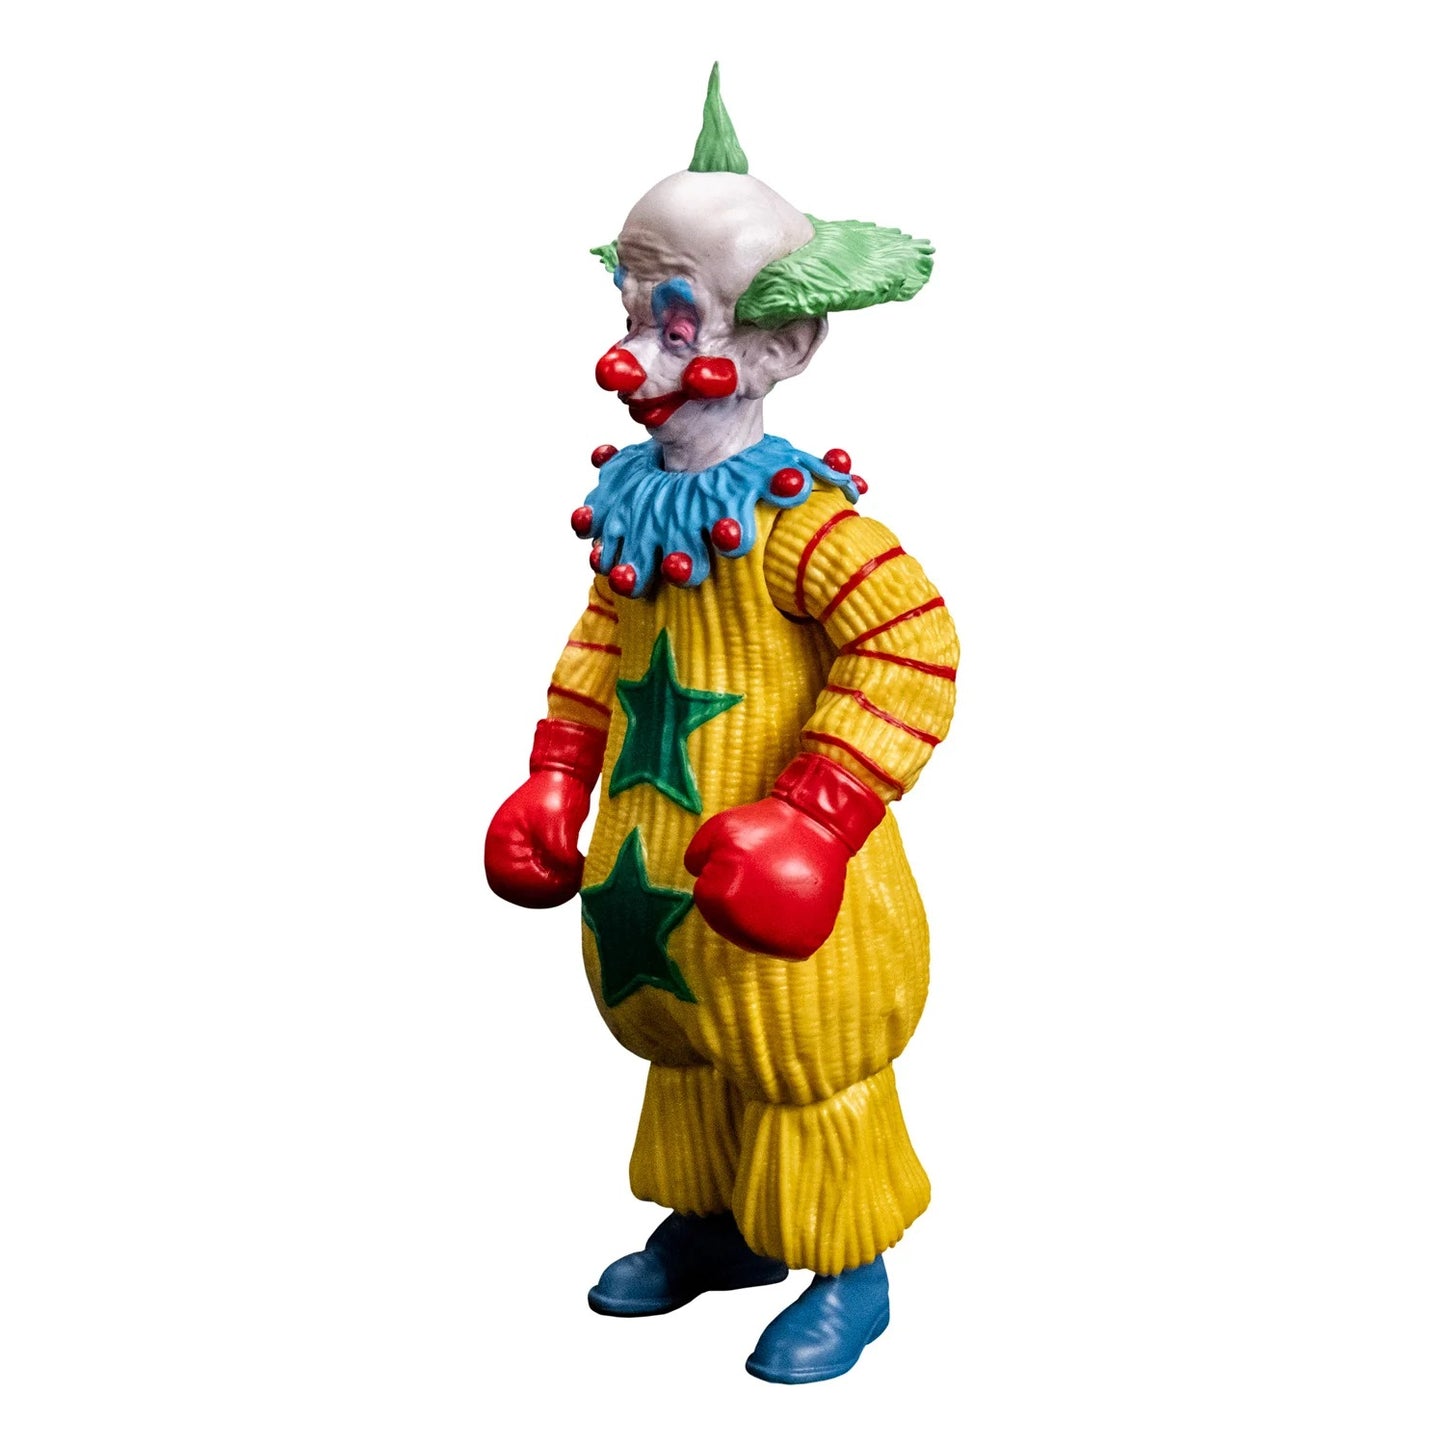 KILLER KLOWNS FROM OUTER SPACE - Shorty Trick Or Treat Studios Figure